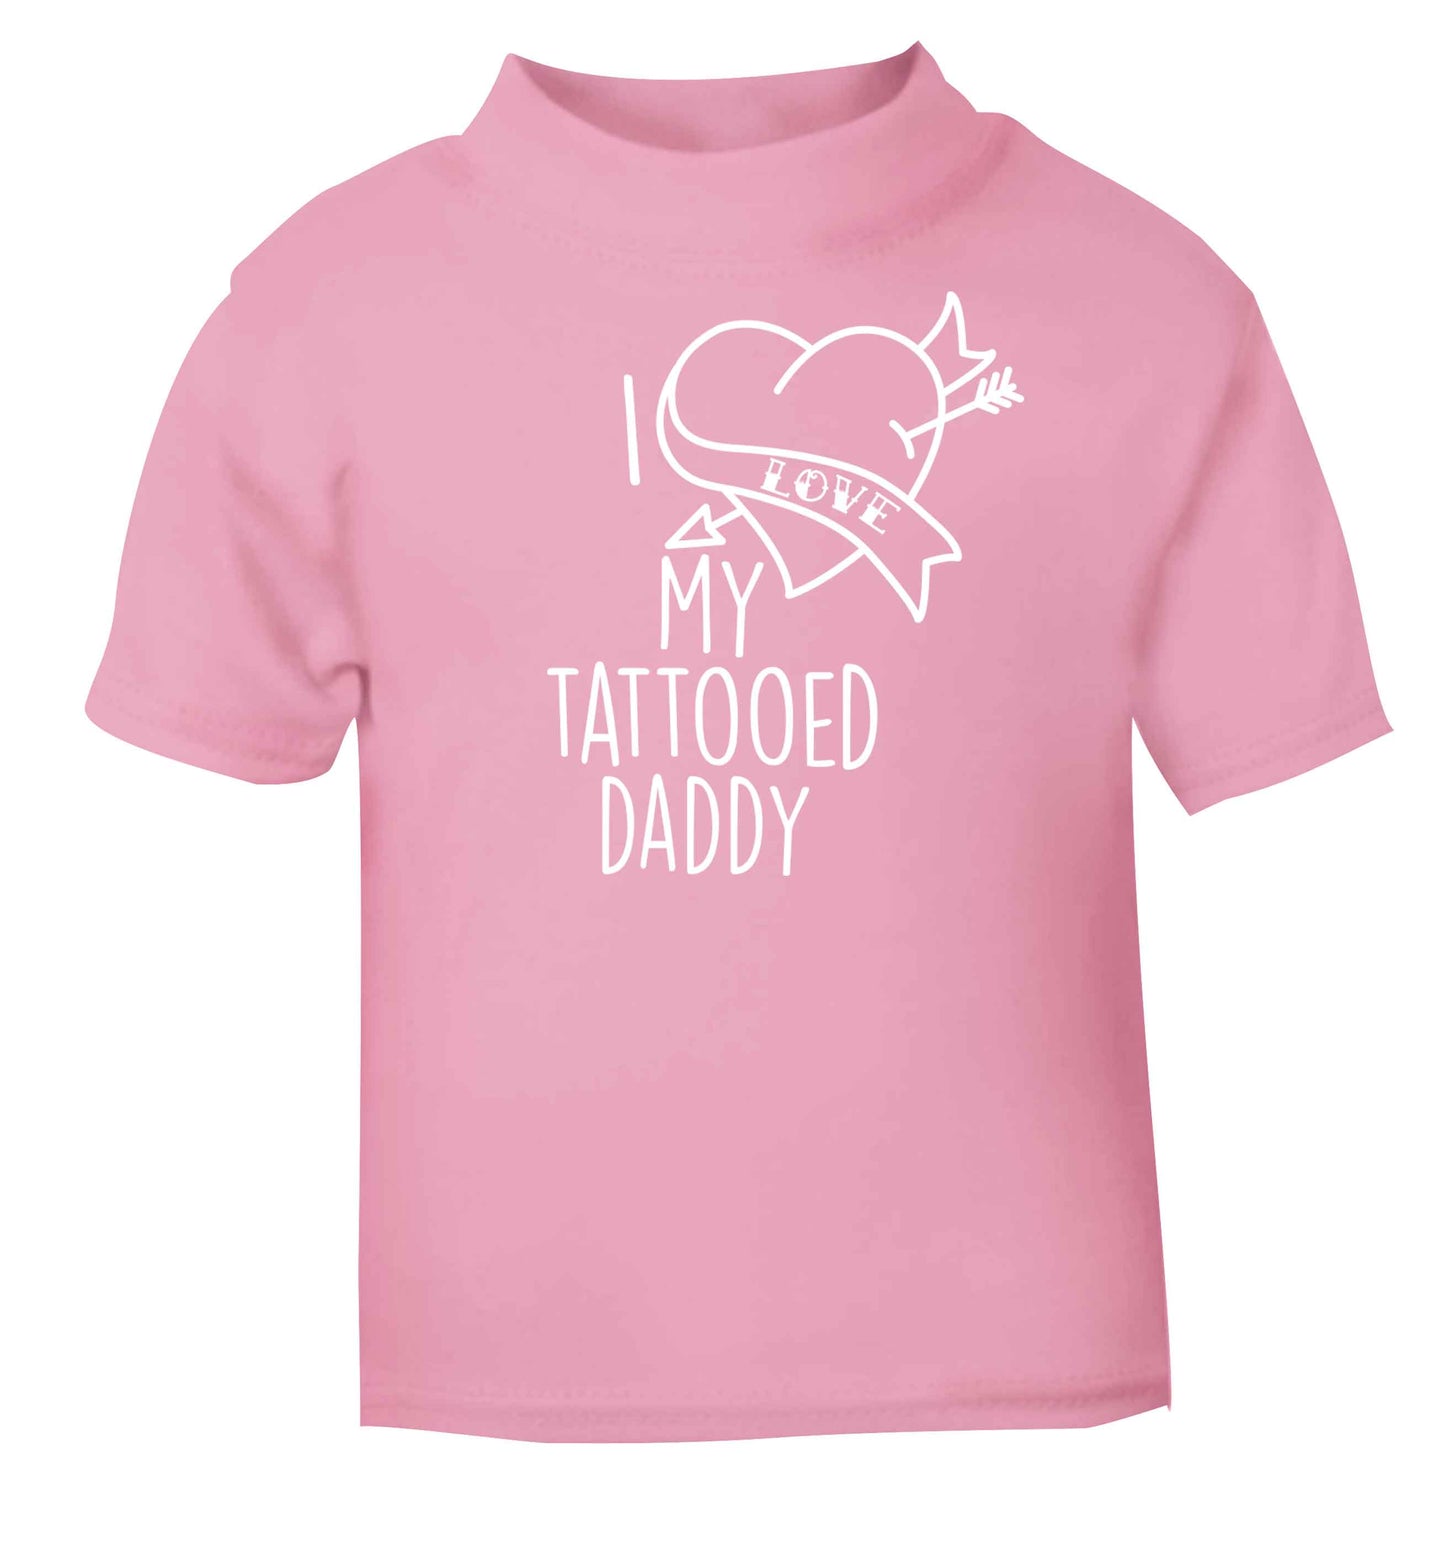 I love my tattooed daddy light pink baby toddler Tshirt 2 Years